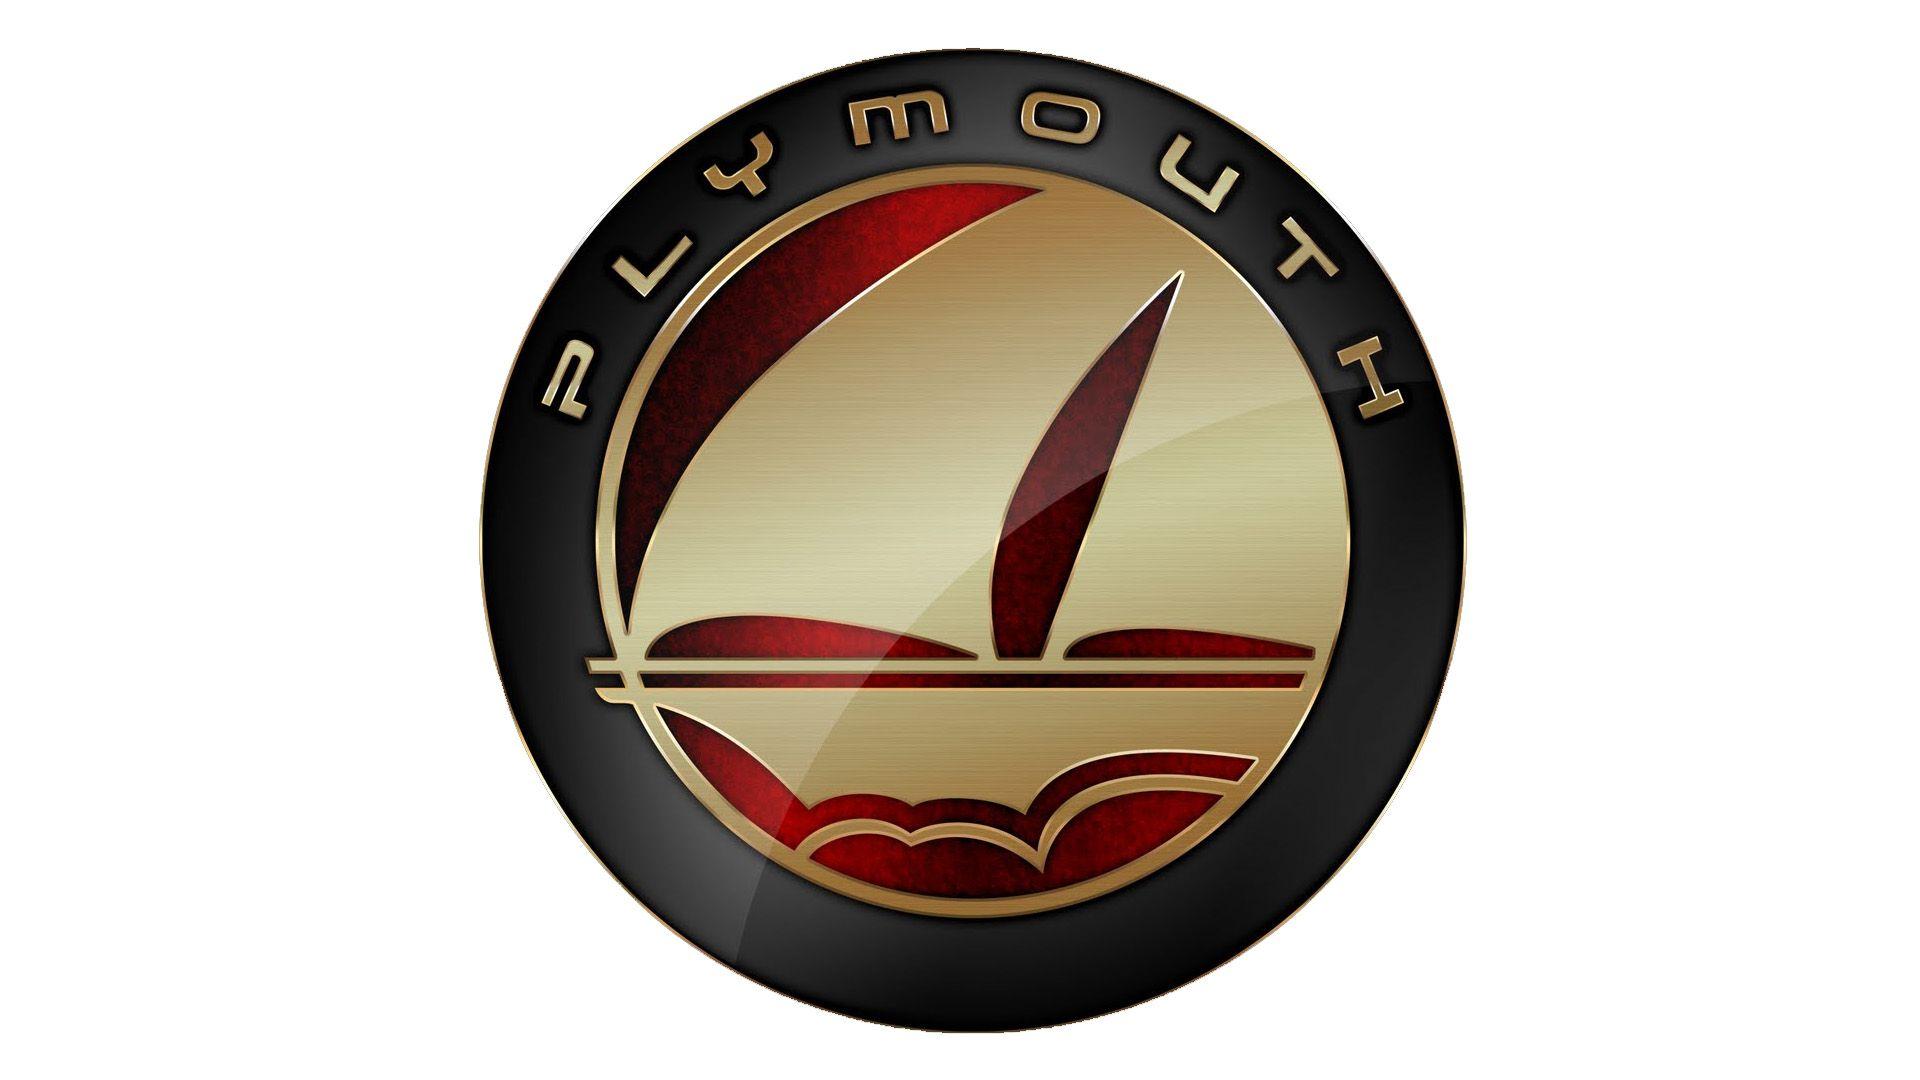 Plymouth Logo - Plymouth Logo Meaning and History, latest models. World Cars Brands